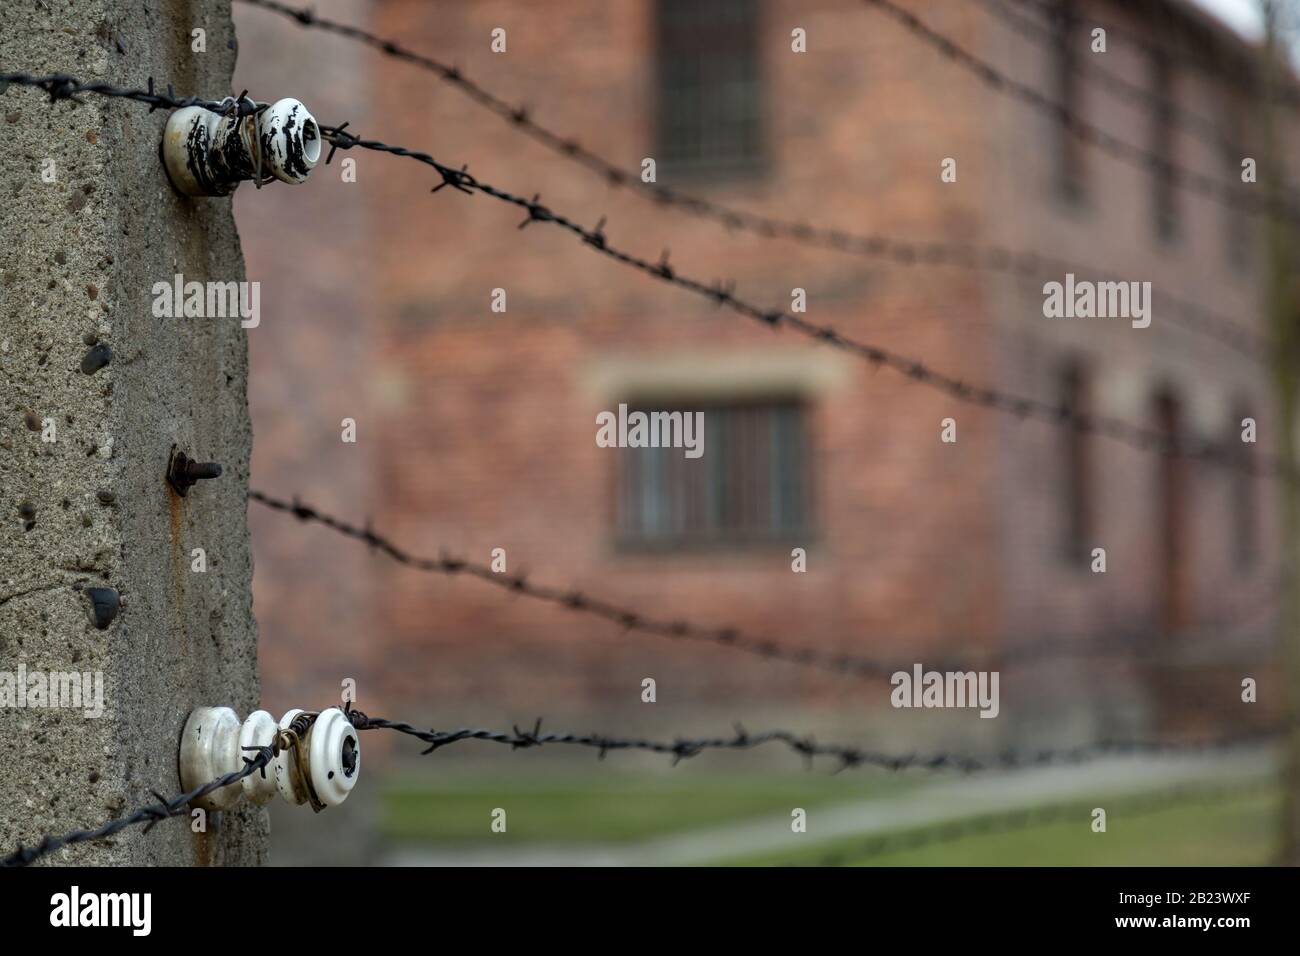 Closeup of electrified fence enclosing the buildings at Auschwitz - Birkenau Museum and Memorial of the Nazi Death Camps of World War II Stock Photo